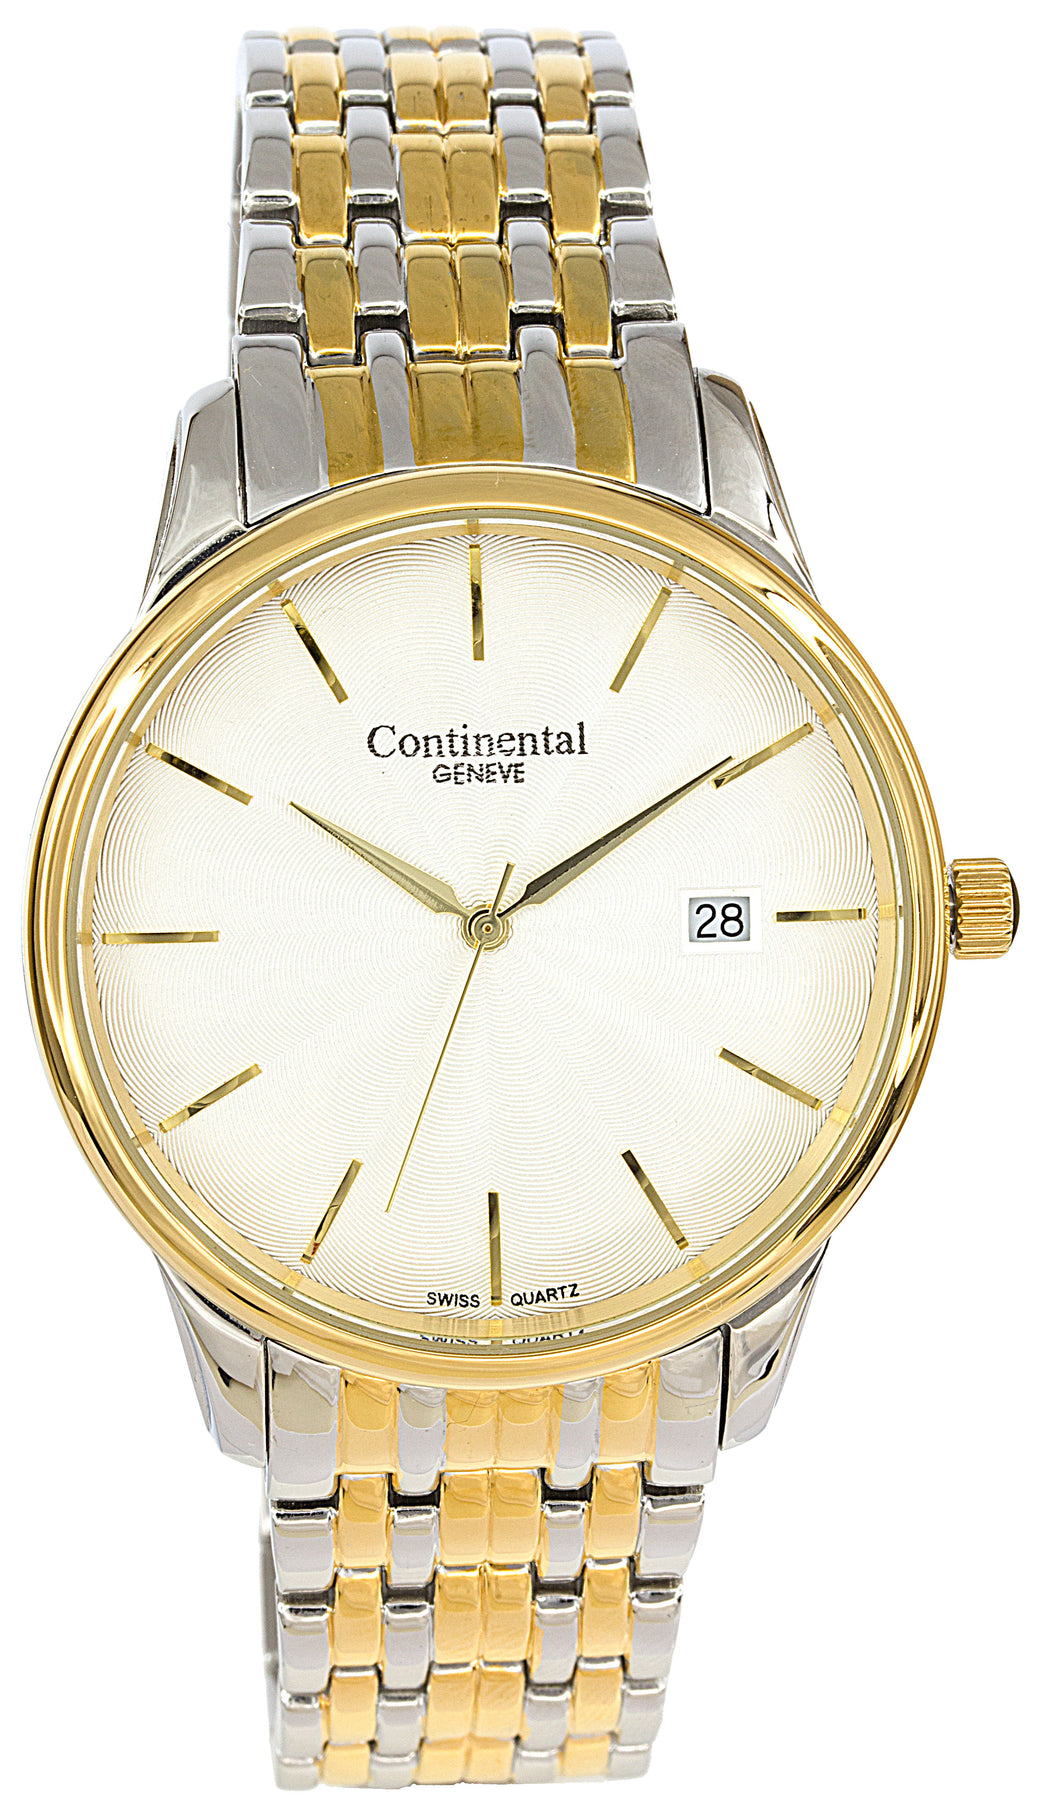 420062 Continental Geneve Two Tone Watch with Date, Textured Dial